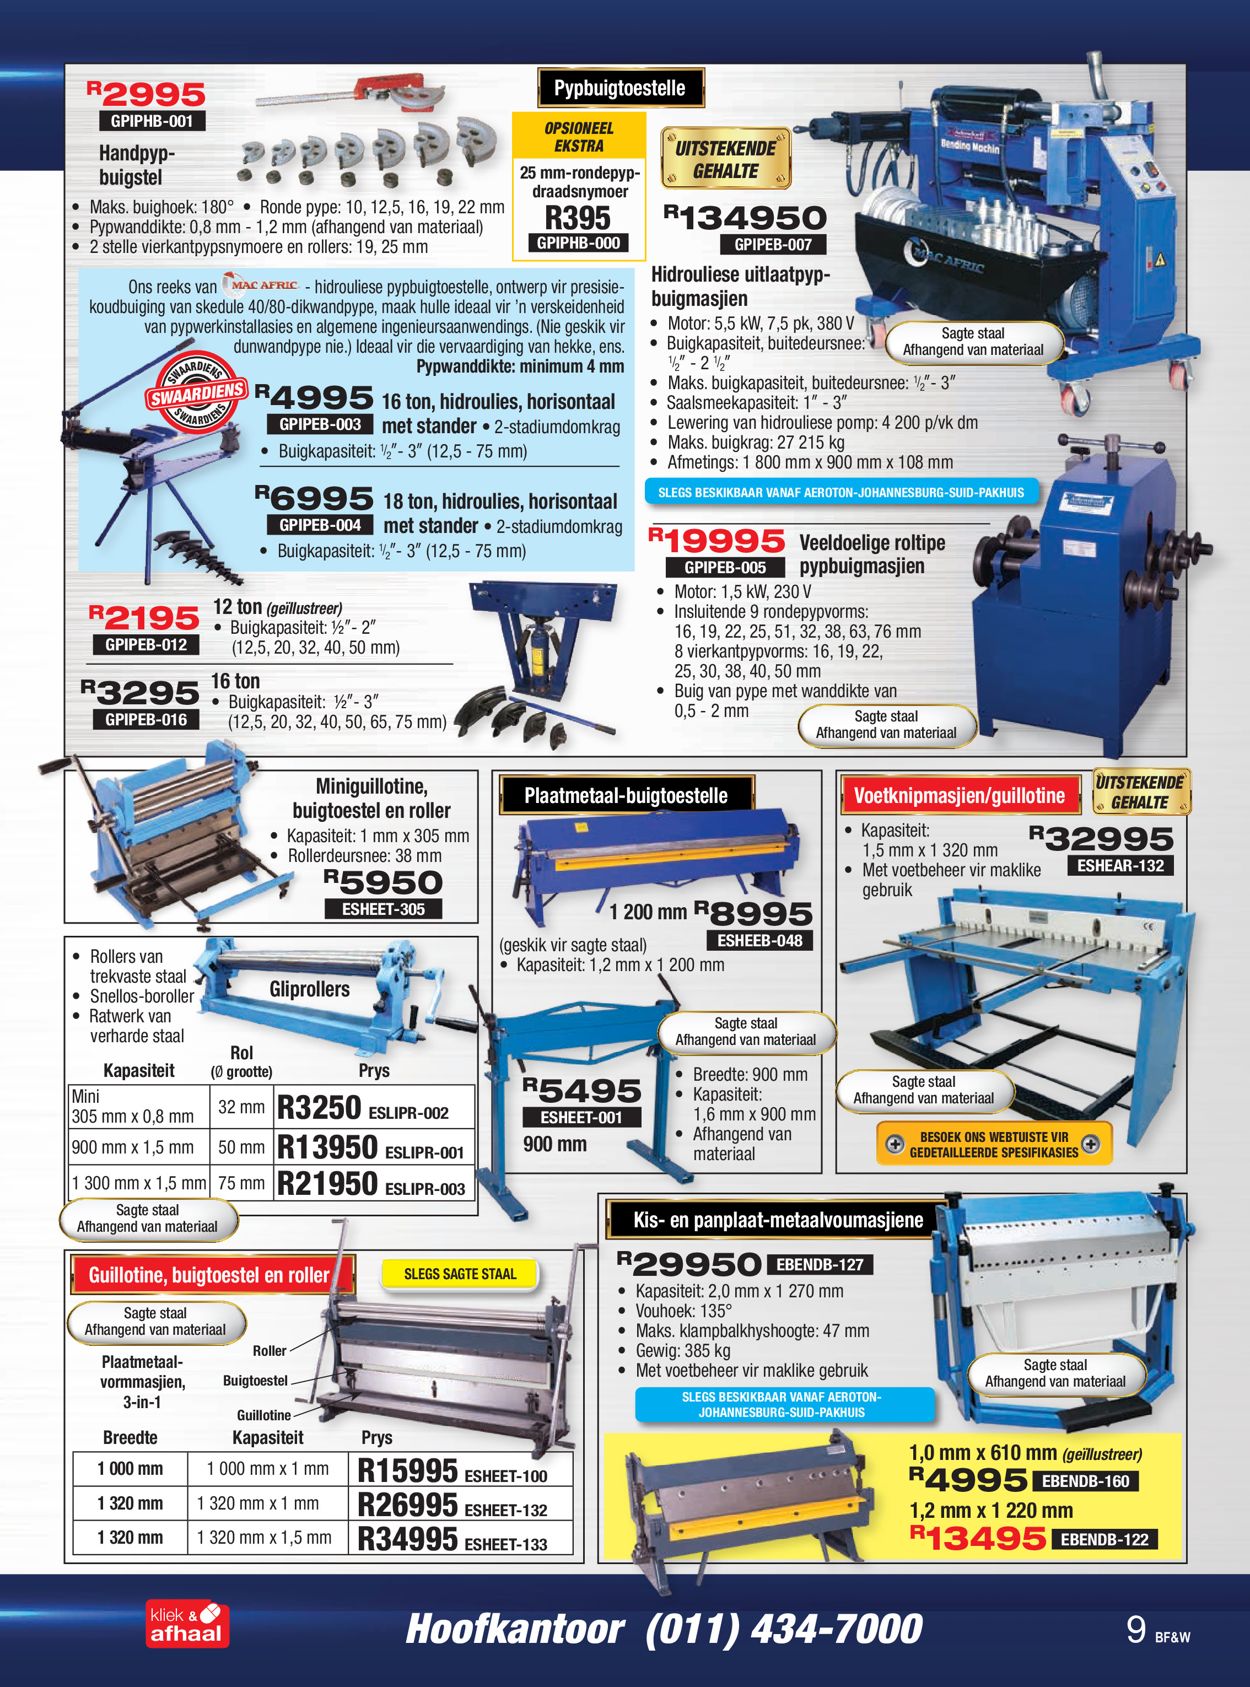 Adendorff Machinery Mart Catalogue from 2021/02/01